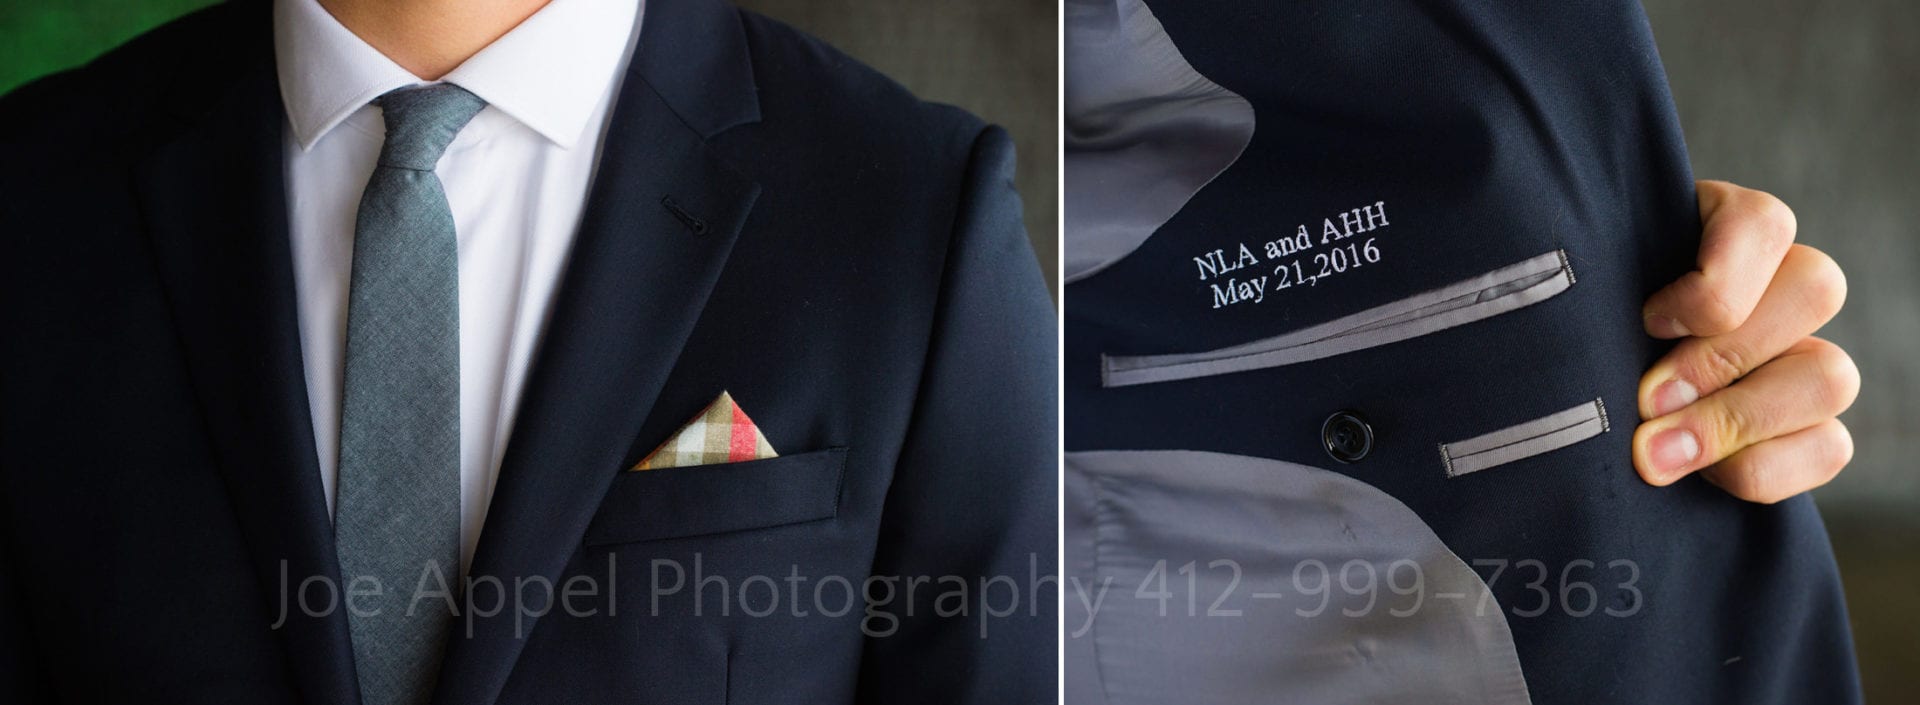 Detail photos of a groom's navy suit with a gray tie and contrasting pocket square. Embroidered inside of the suit is the couple's initials and wedding date.